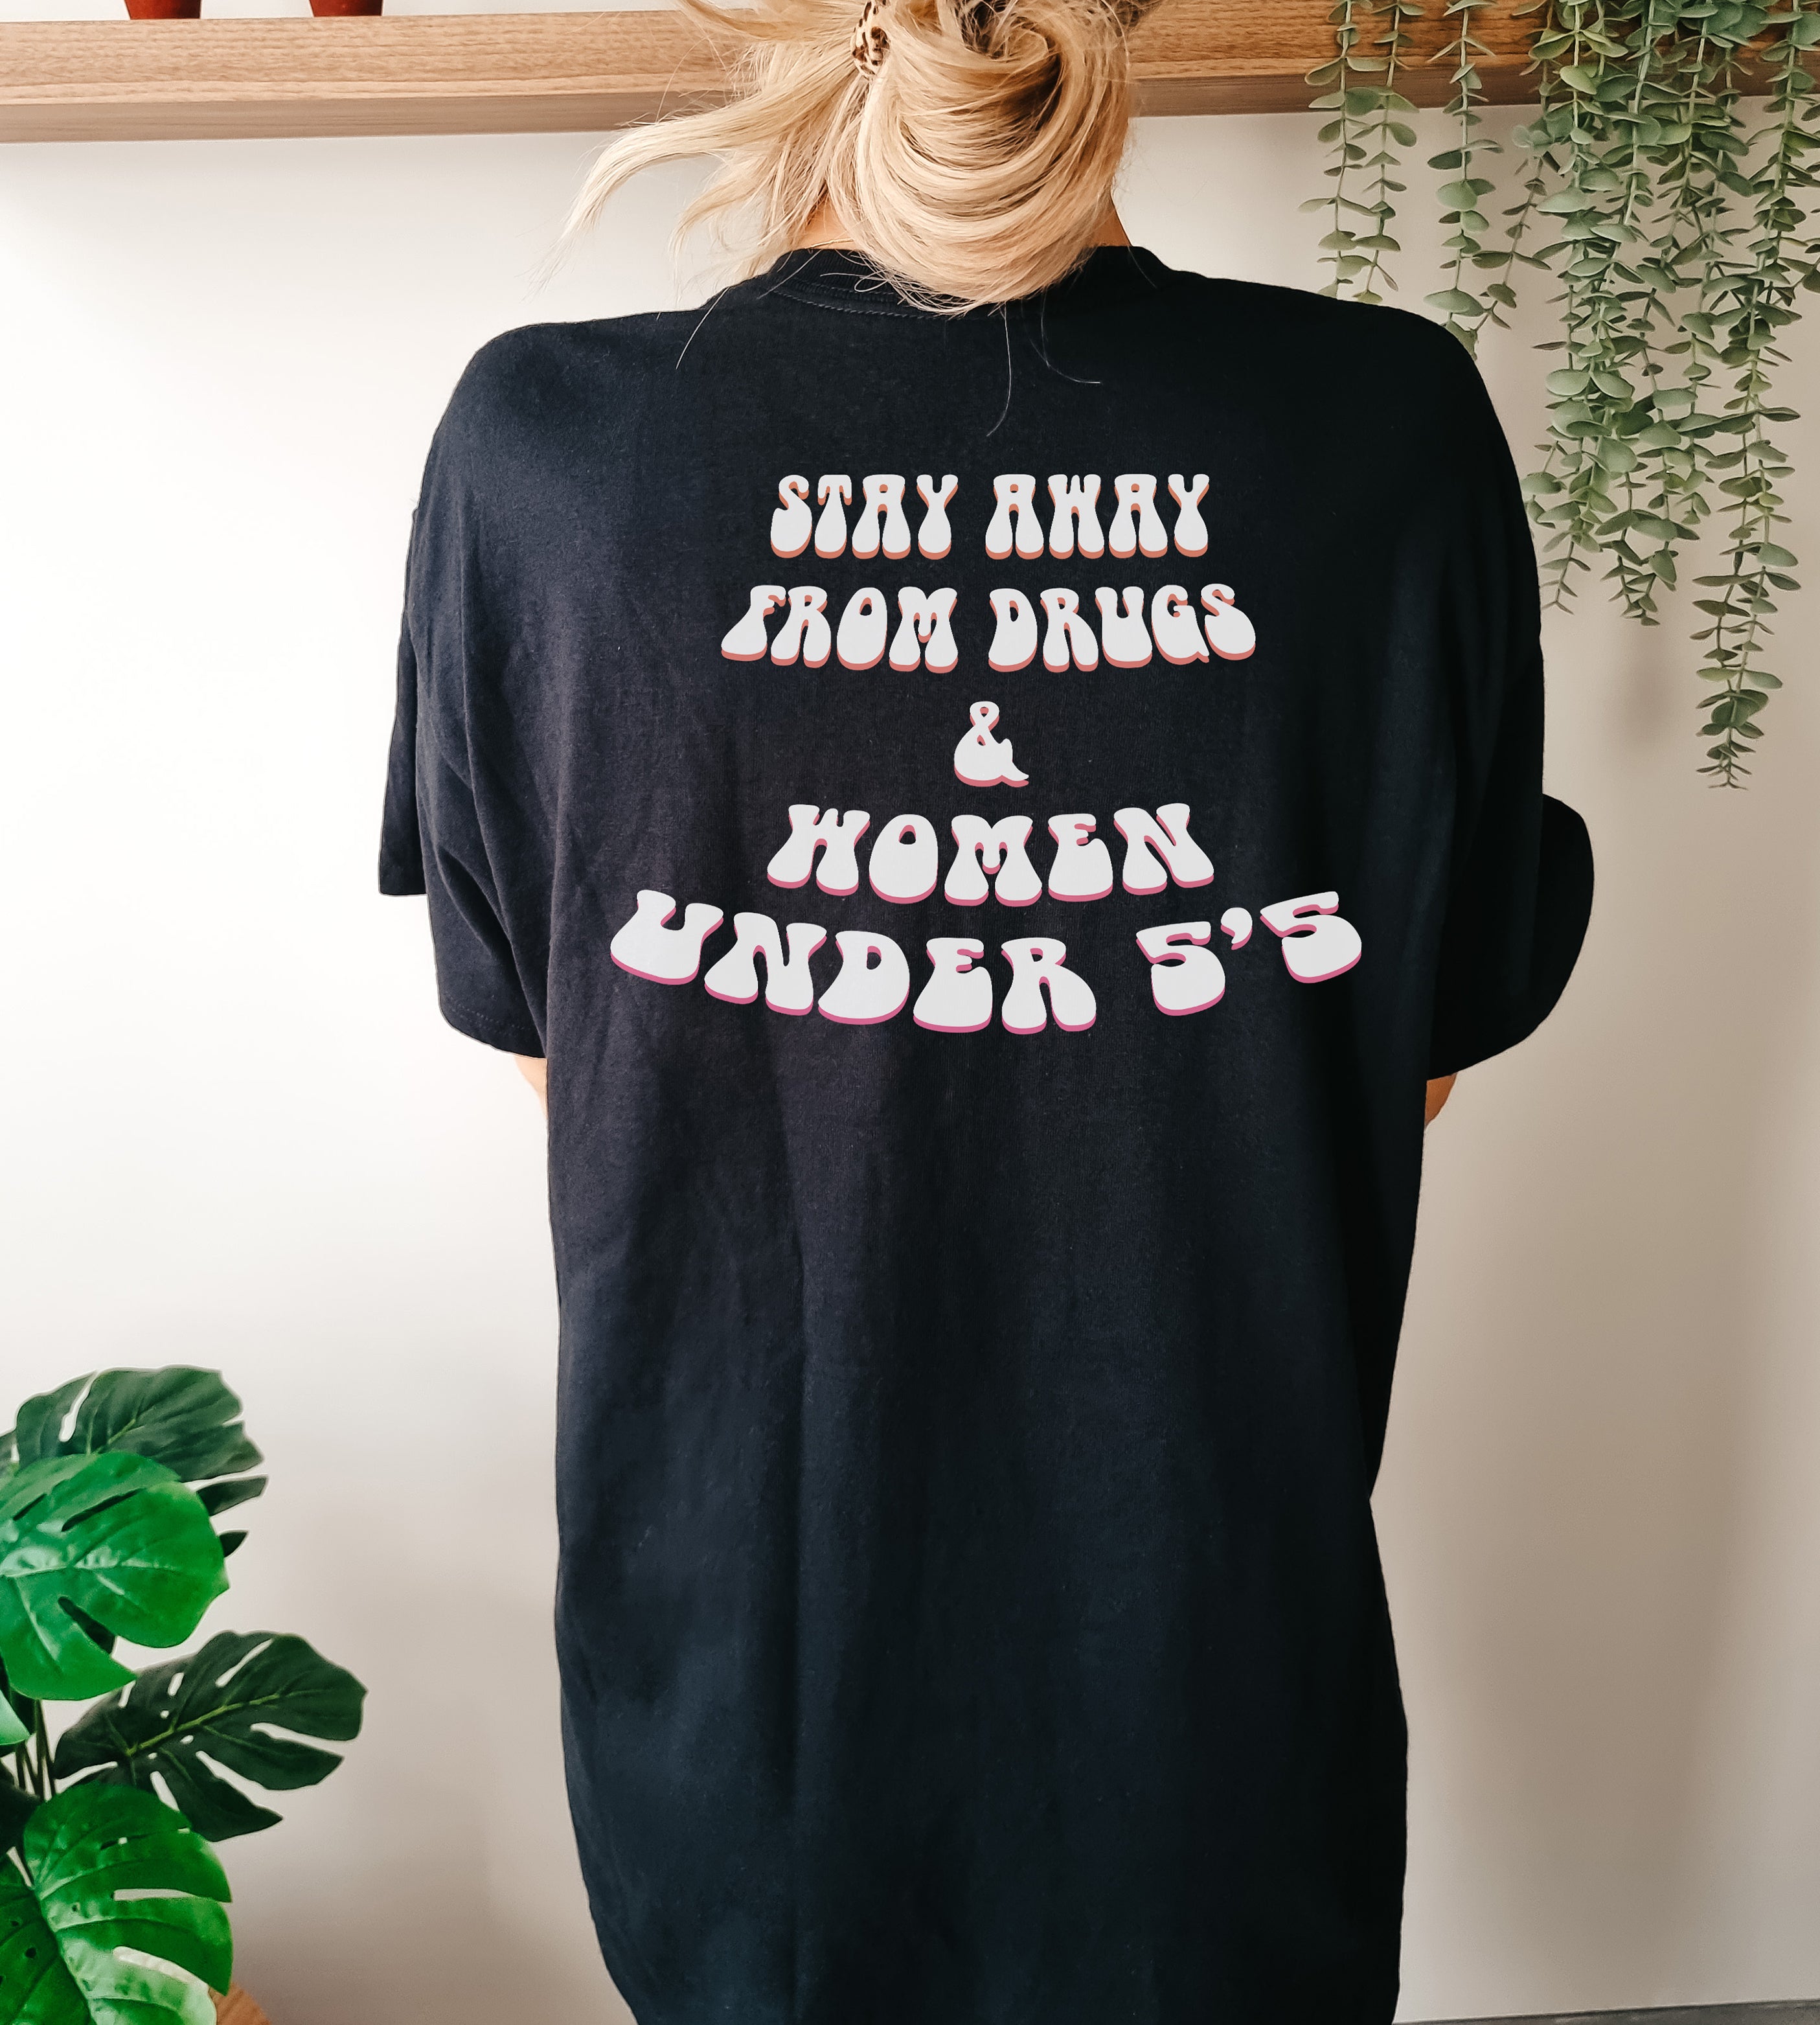 Stay away from drugs T-Shirt